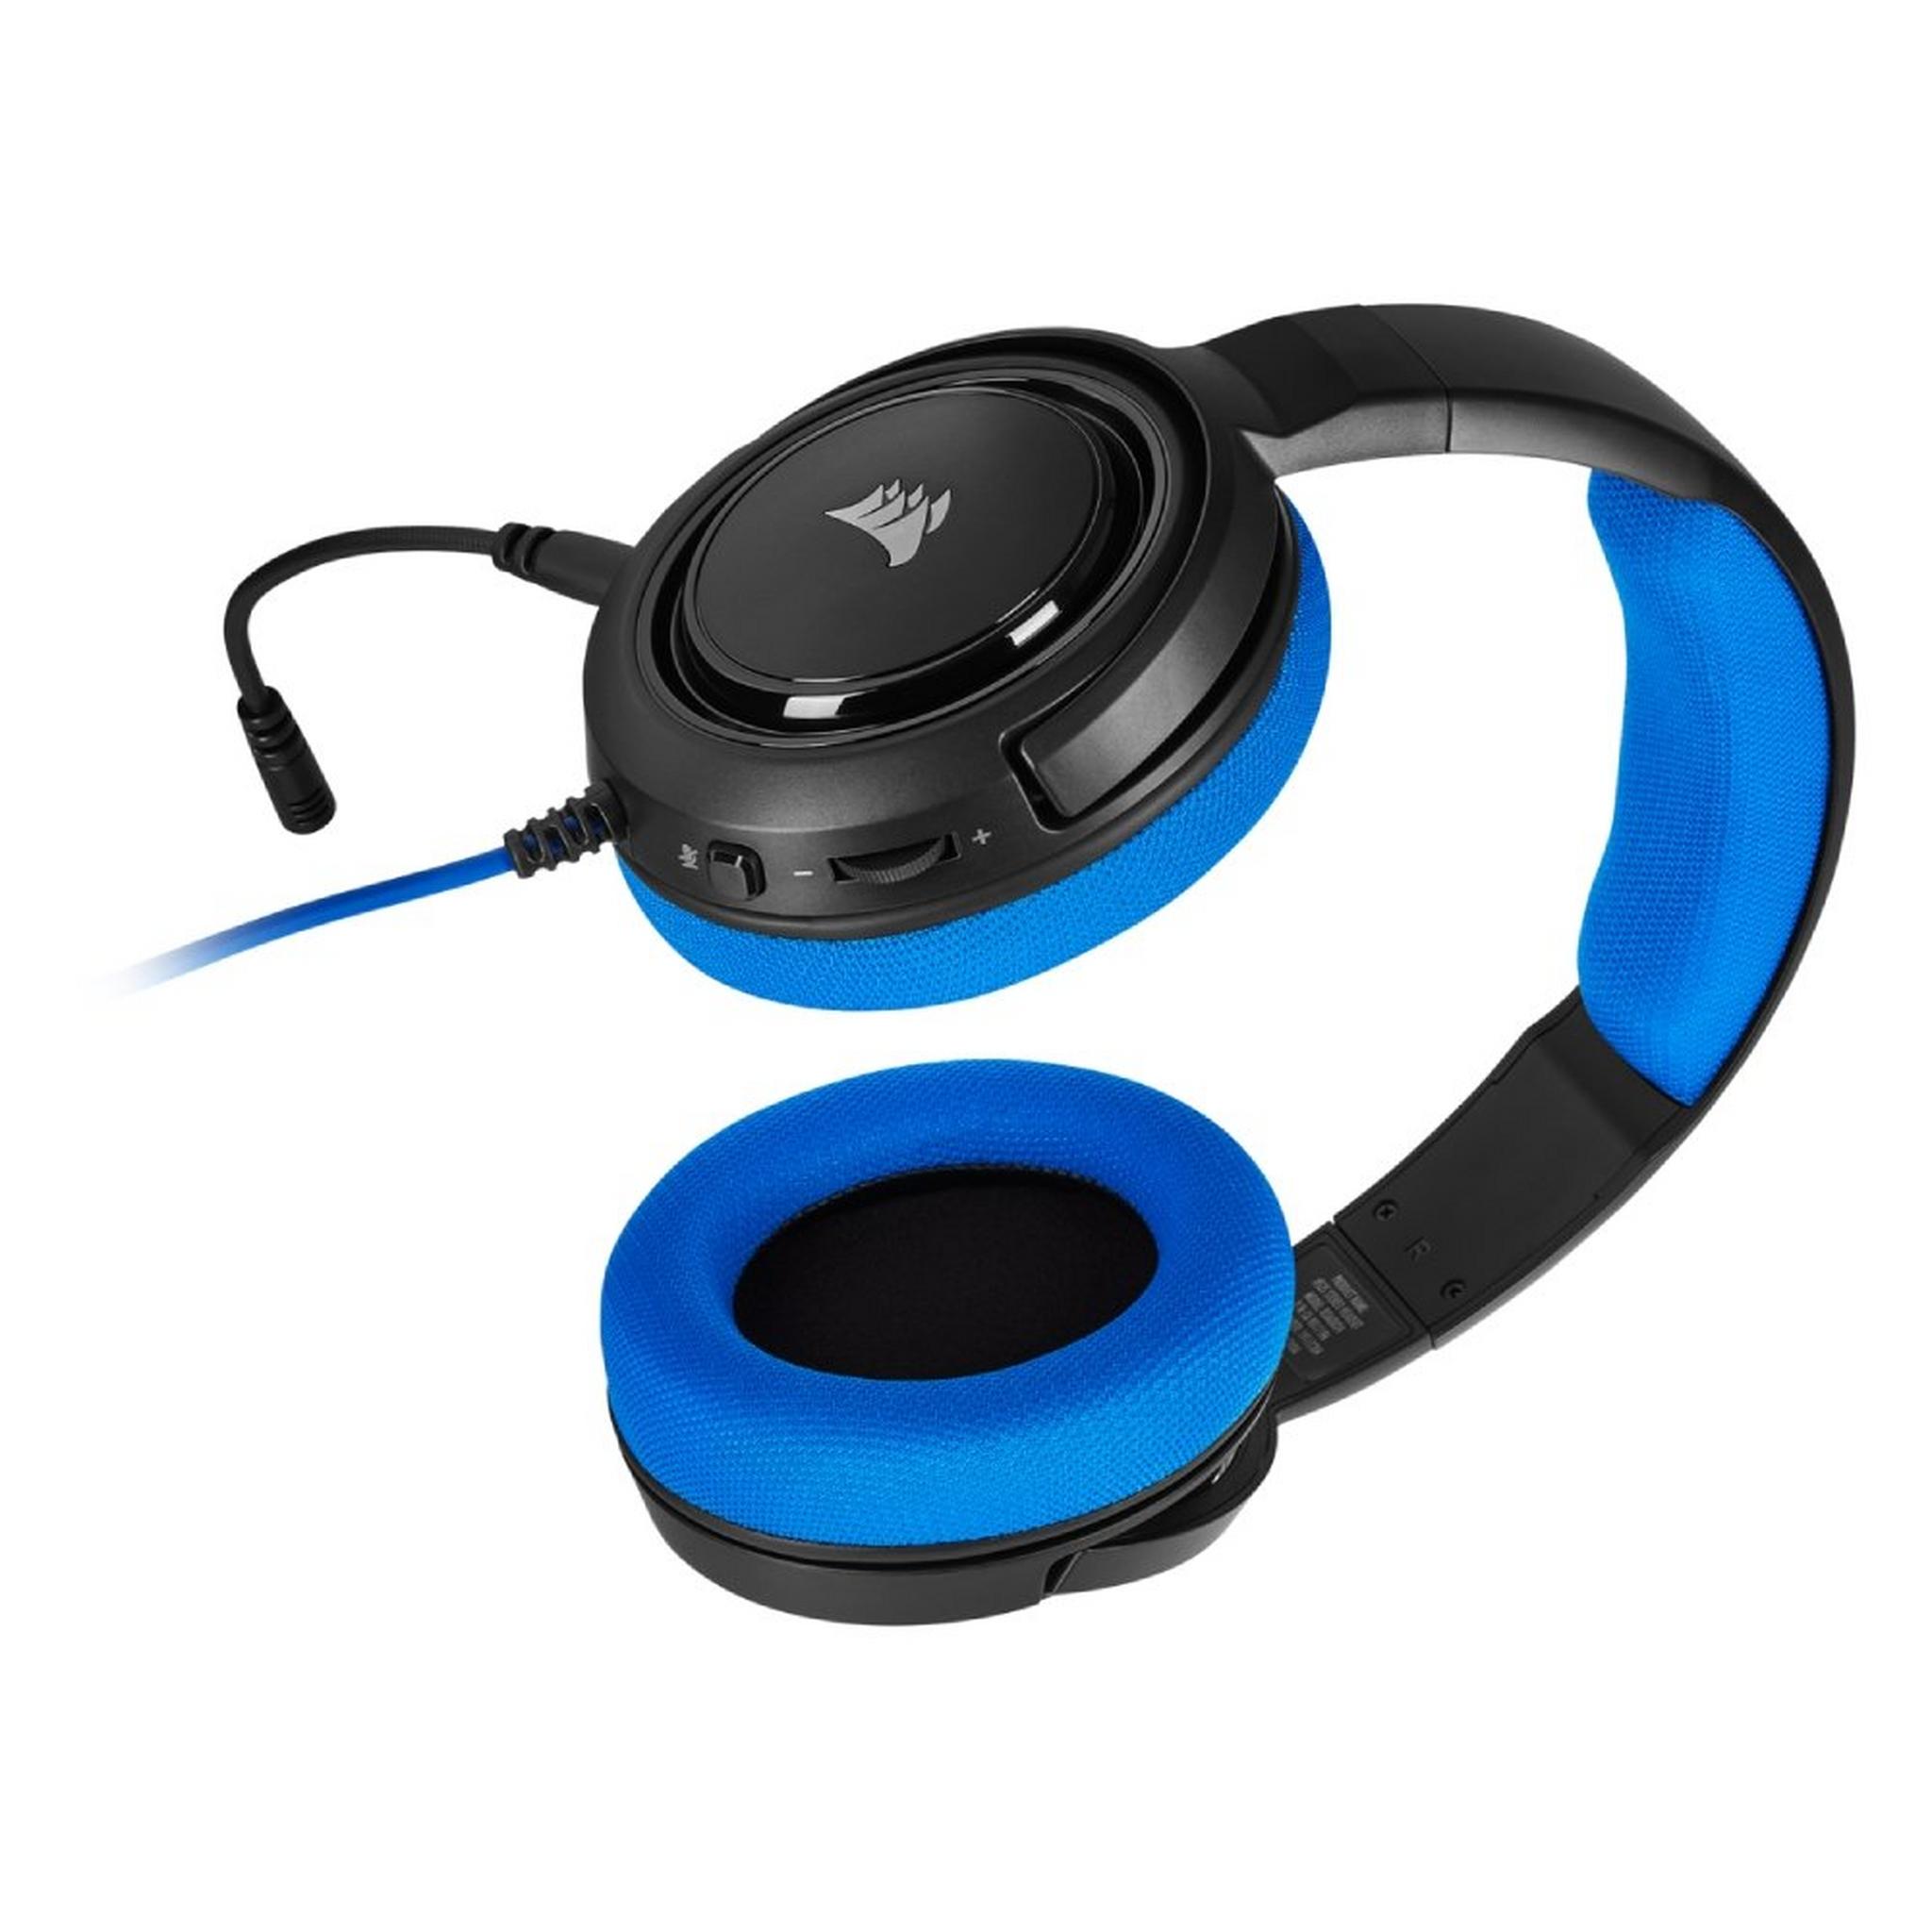 Corsair HS35 Stereo Wired Gaming Headset - Blue